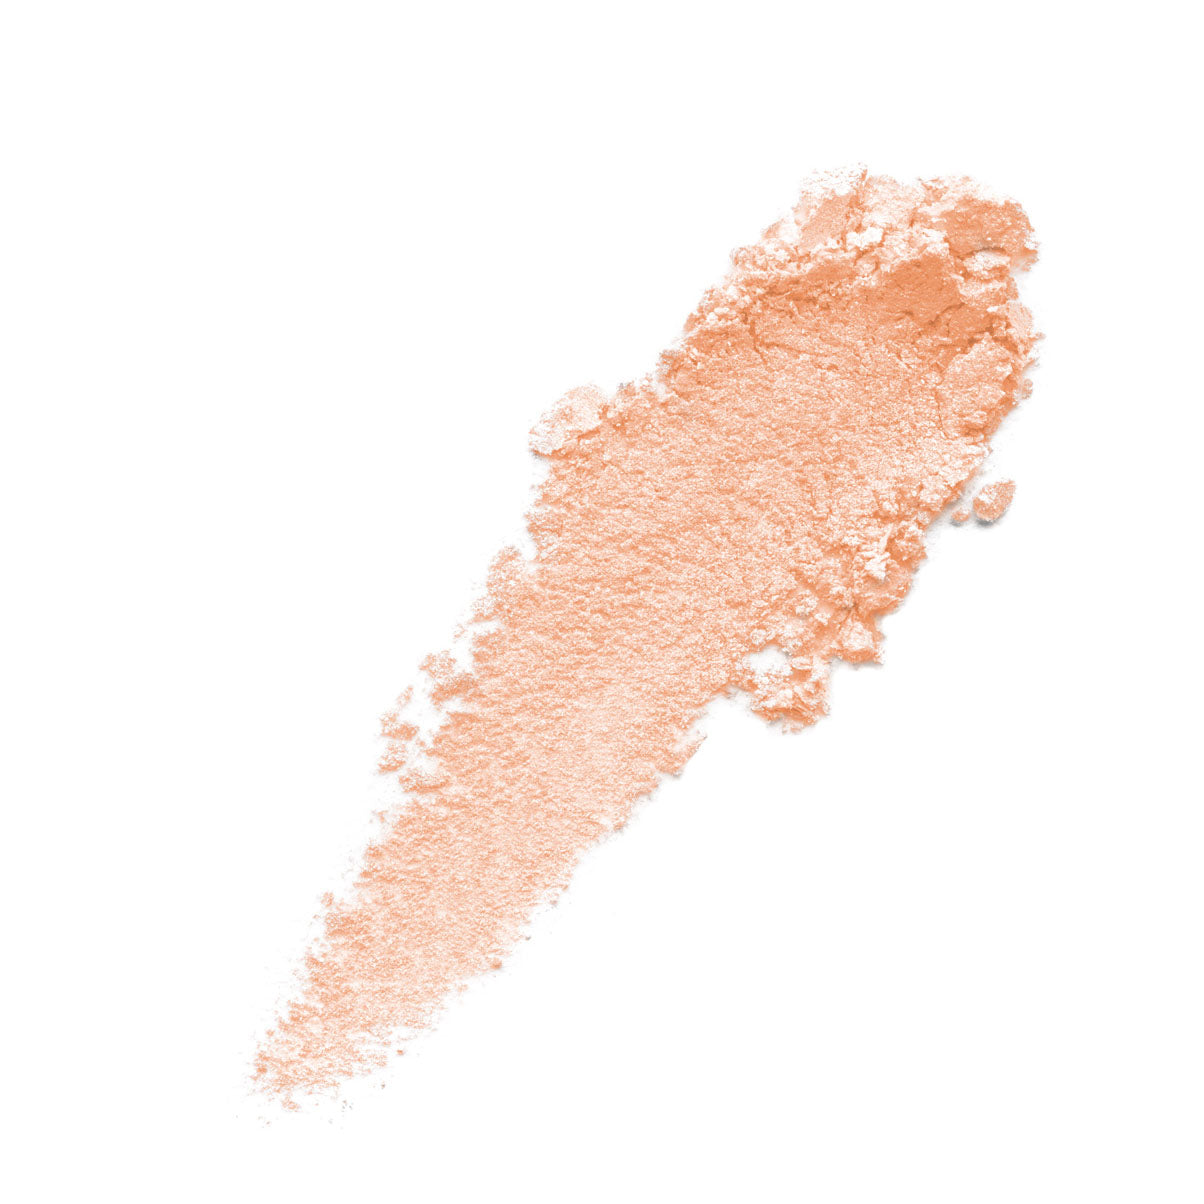 A swatch of the creamy pale shade called Salmon.